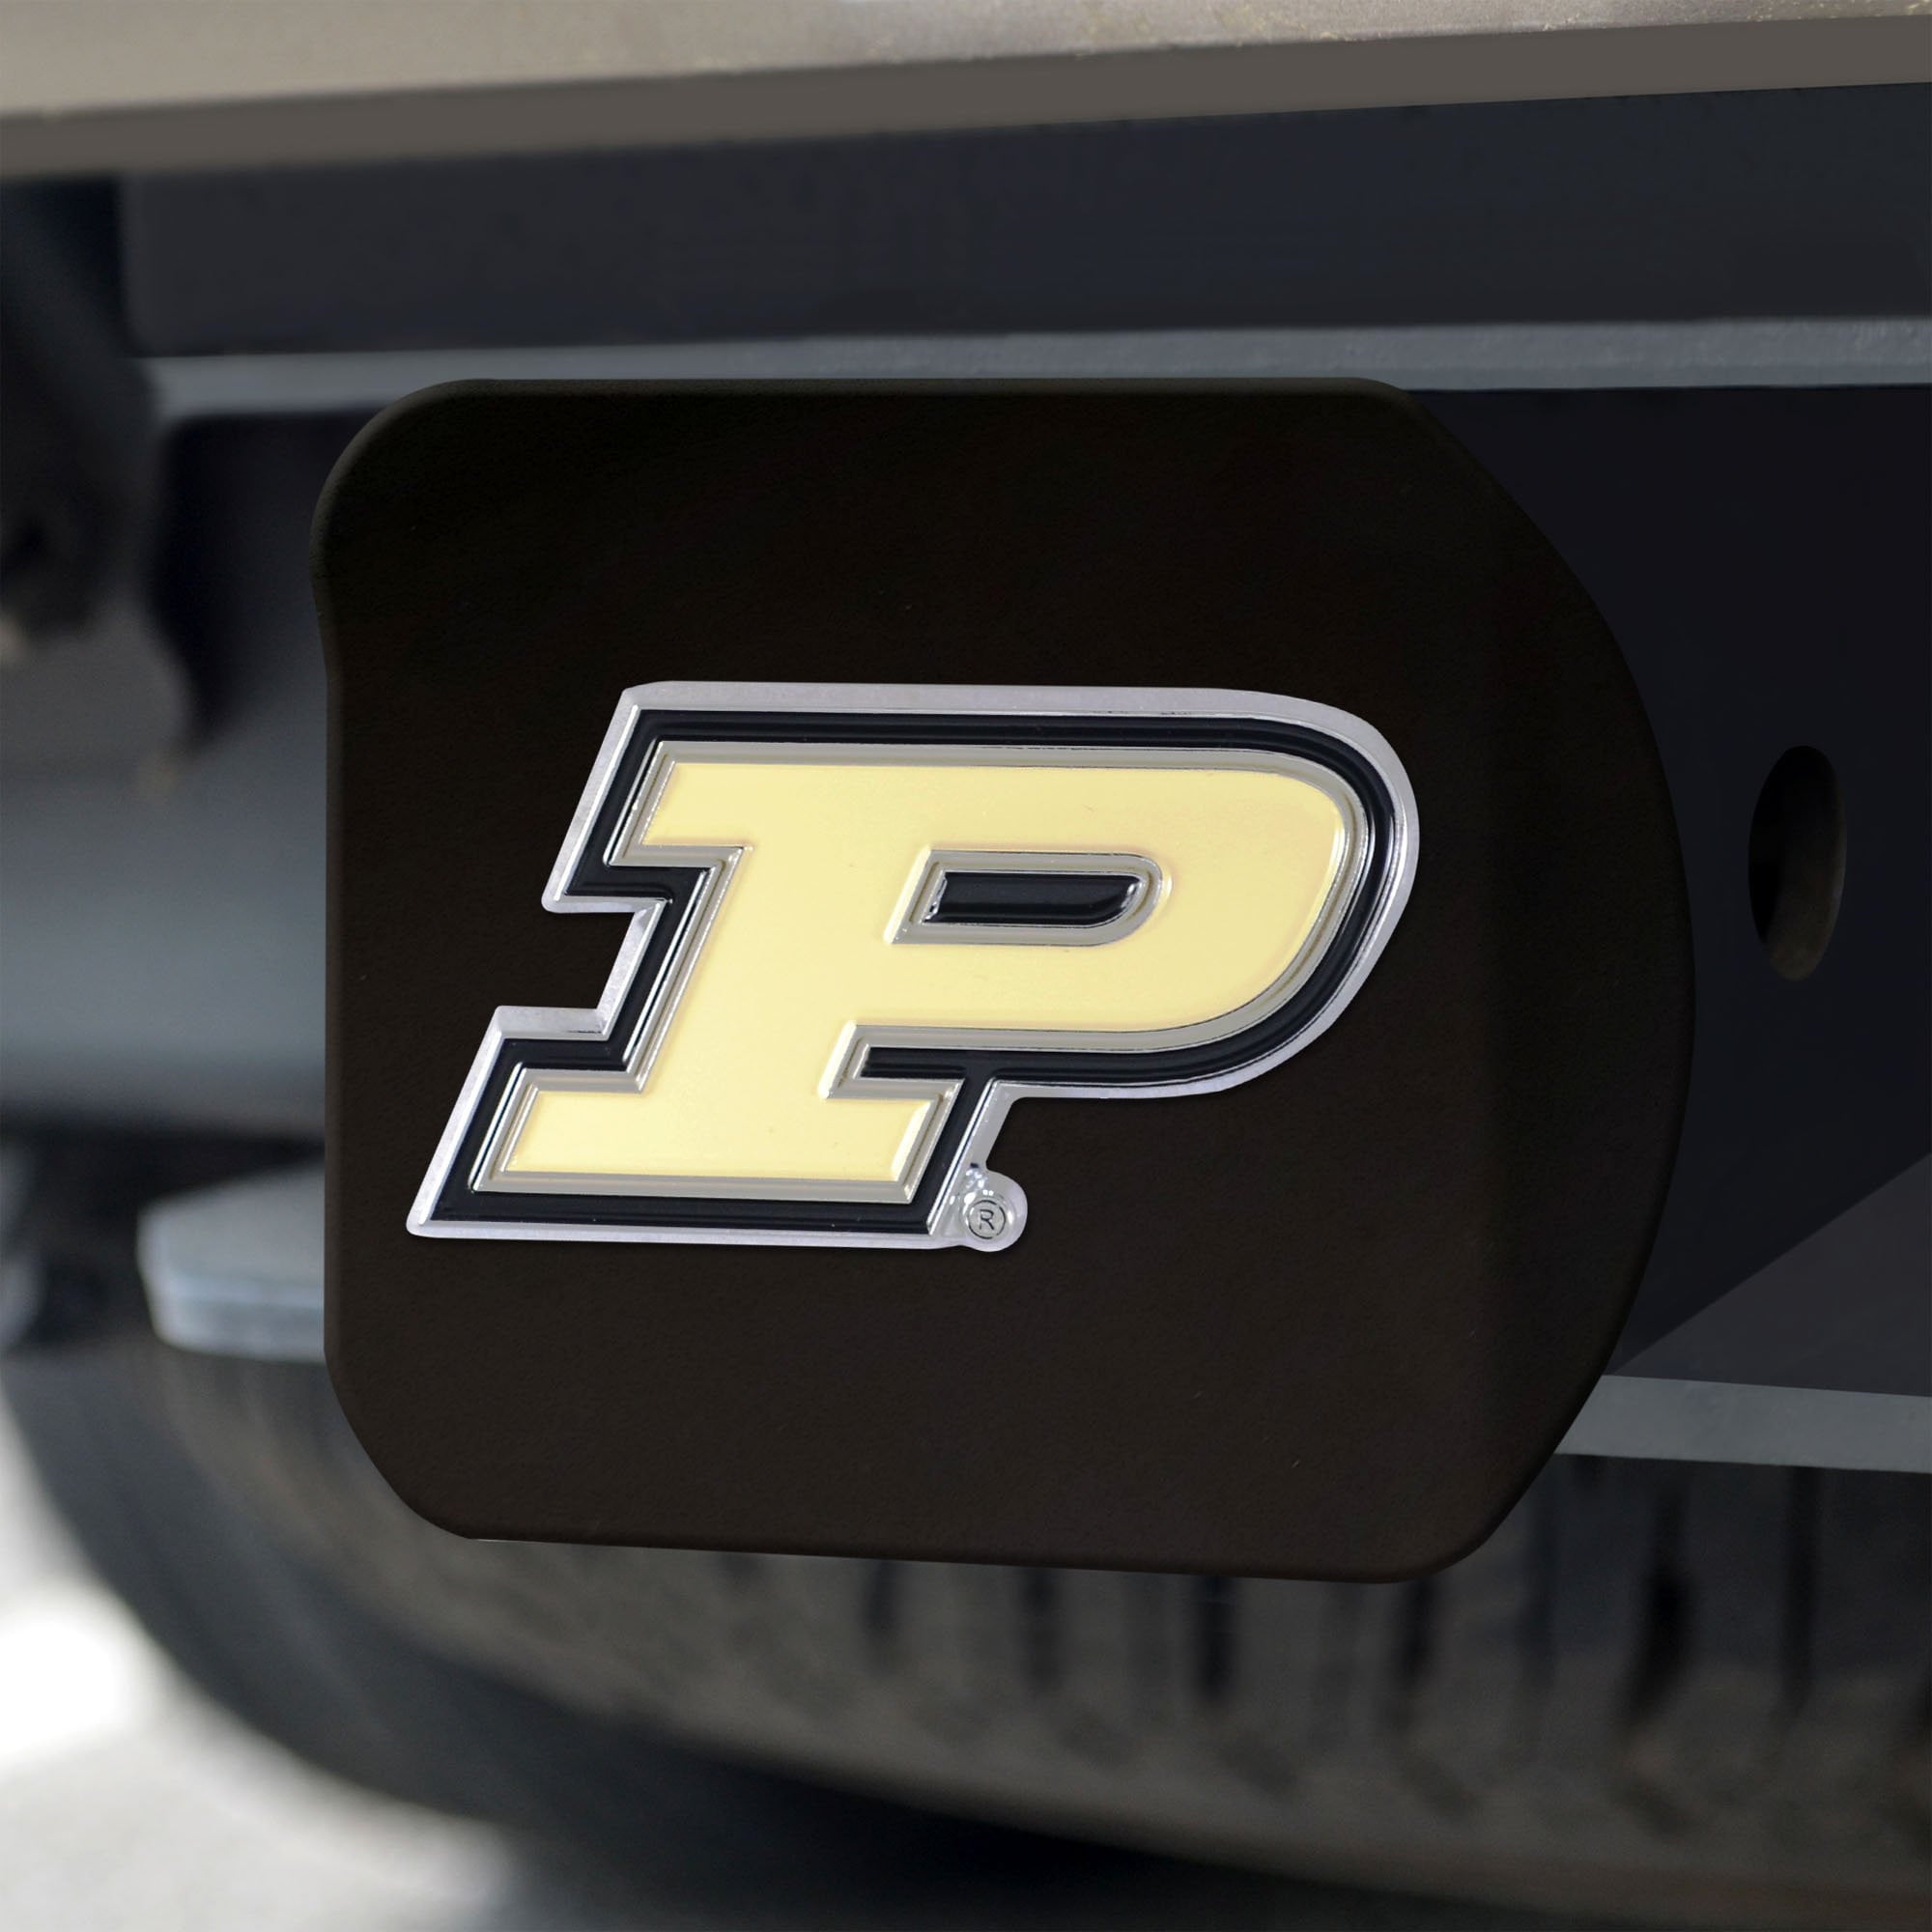 Purdue Boilermakers Color Hitch Cover - Black 3.4